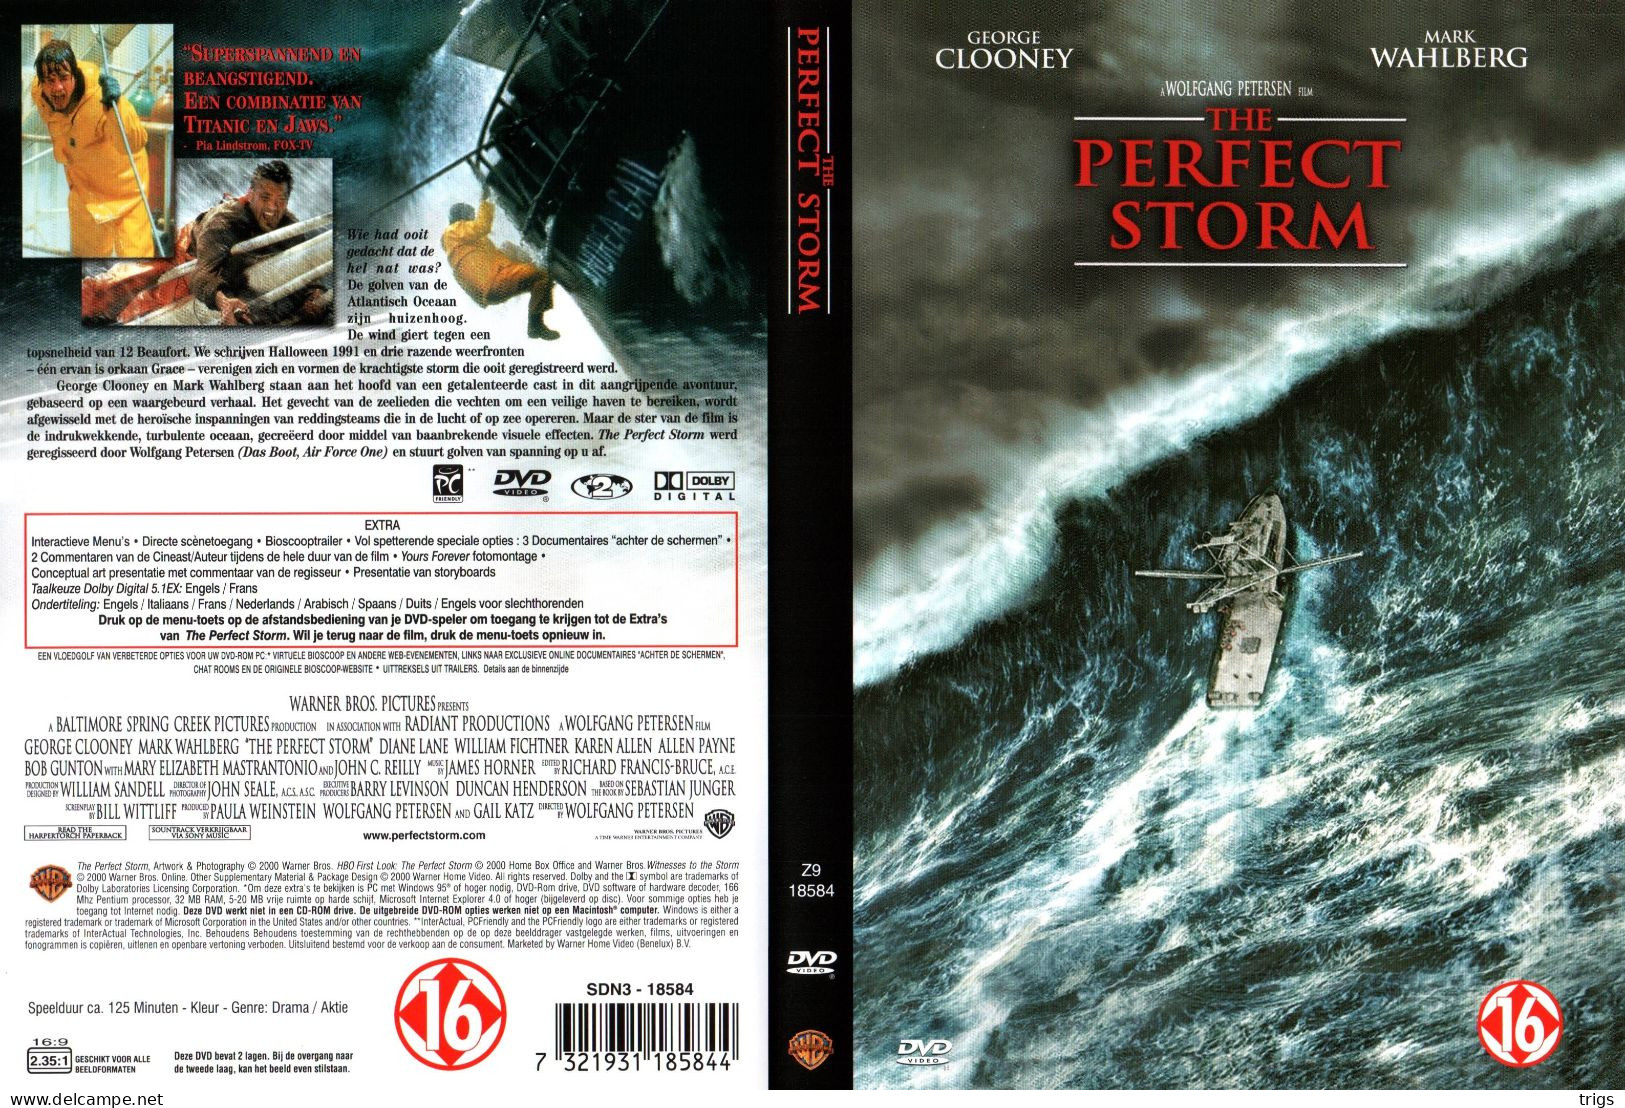 DVD - The Perfect Storm - Action, Adventure